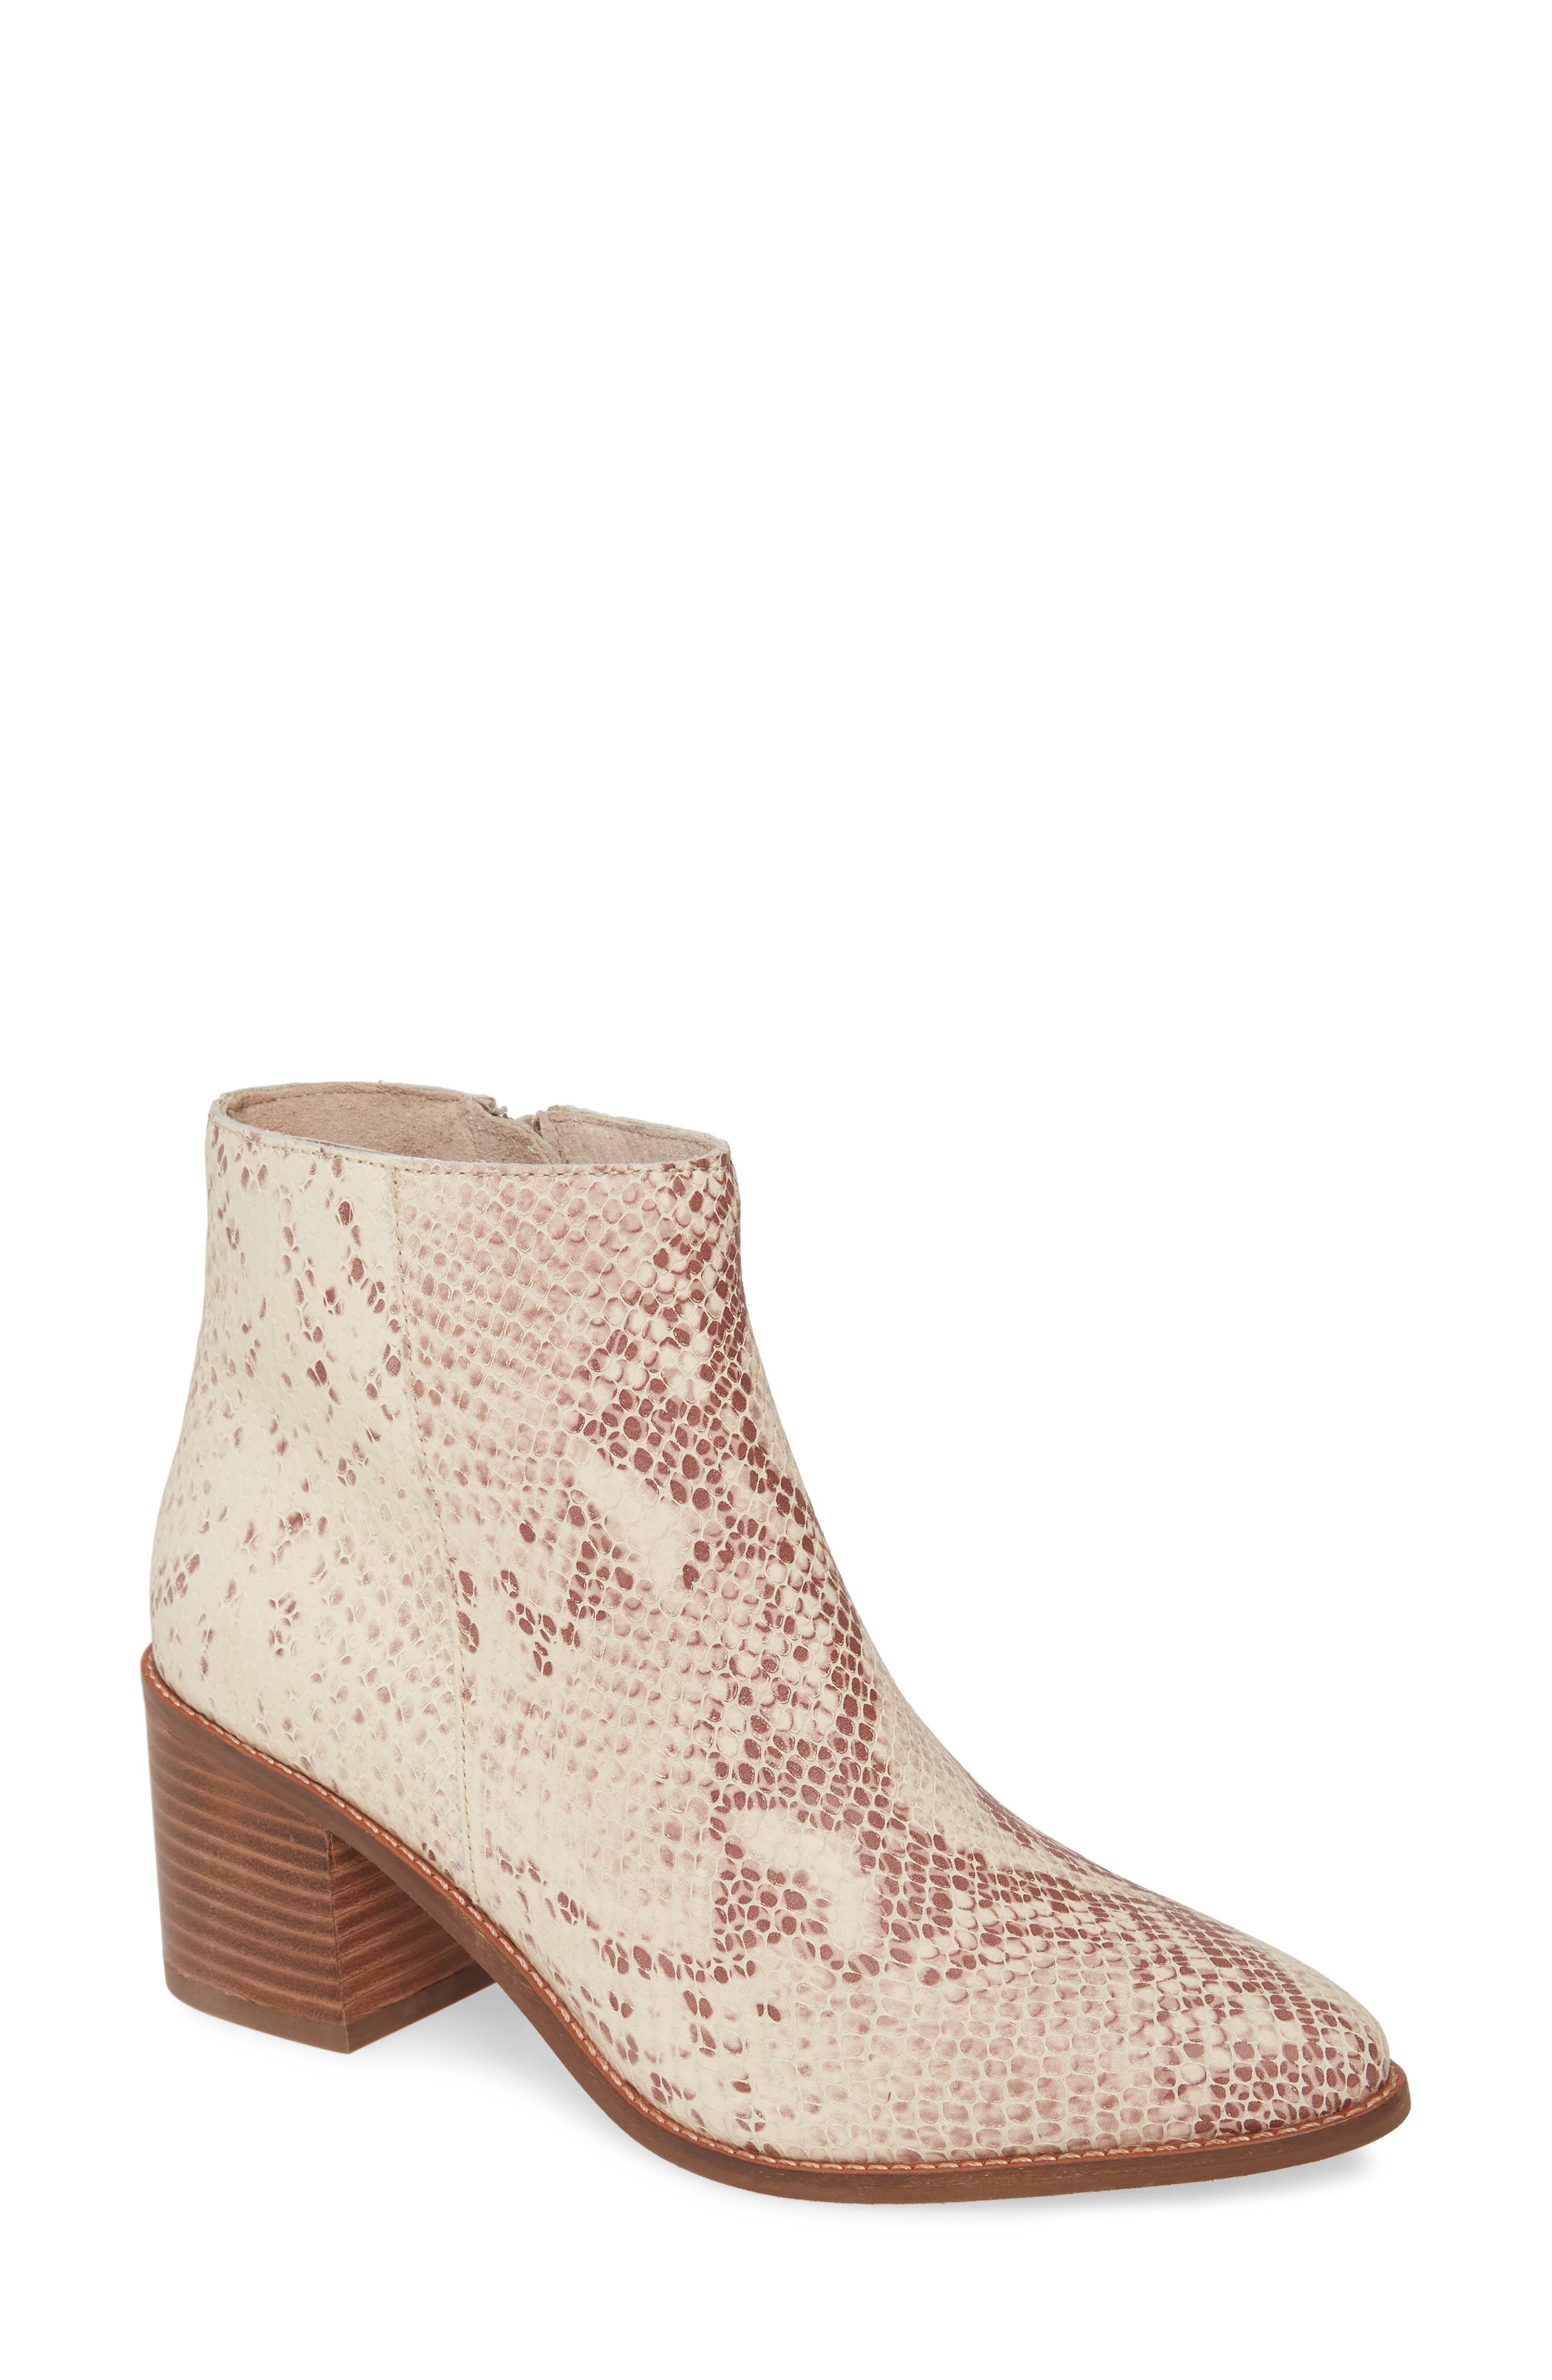 seychelles shoes booties